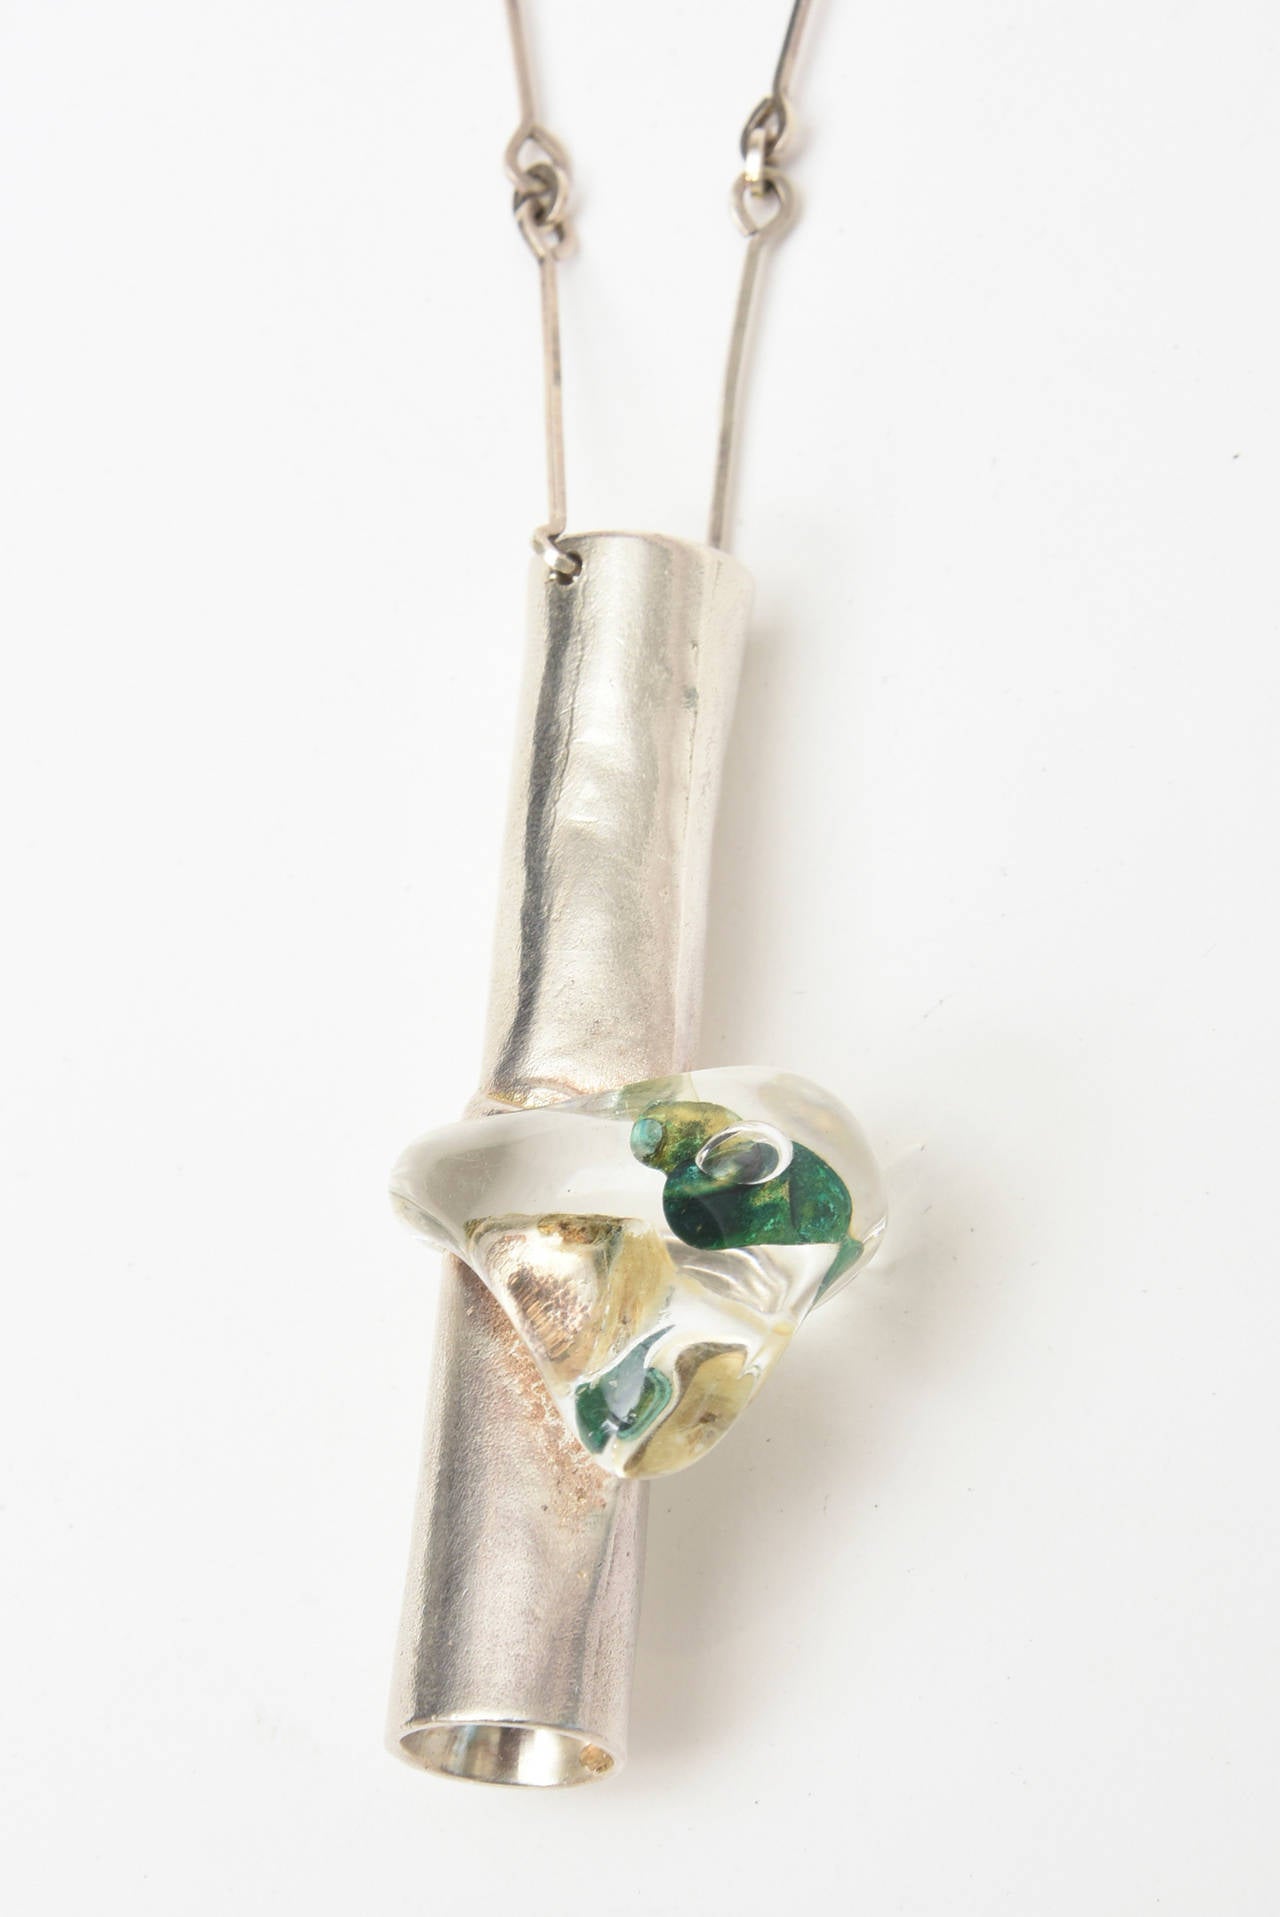 This stellar and sculptural vintage long necklace has a sculptural sterling silver tube with a chunk of green resin embedded in the sterling. Marked. Hallmark 925 Finland Lapponia. Bjorn Weckstrom designed this piece of art and sculpture and jewelry